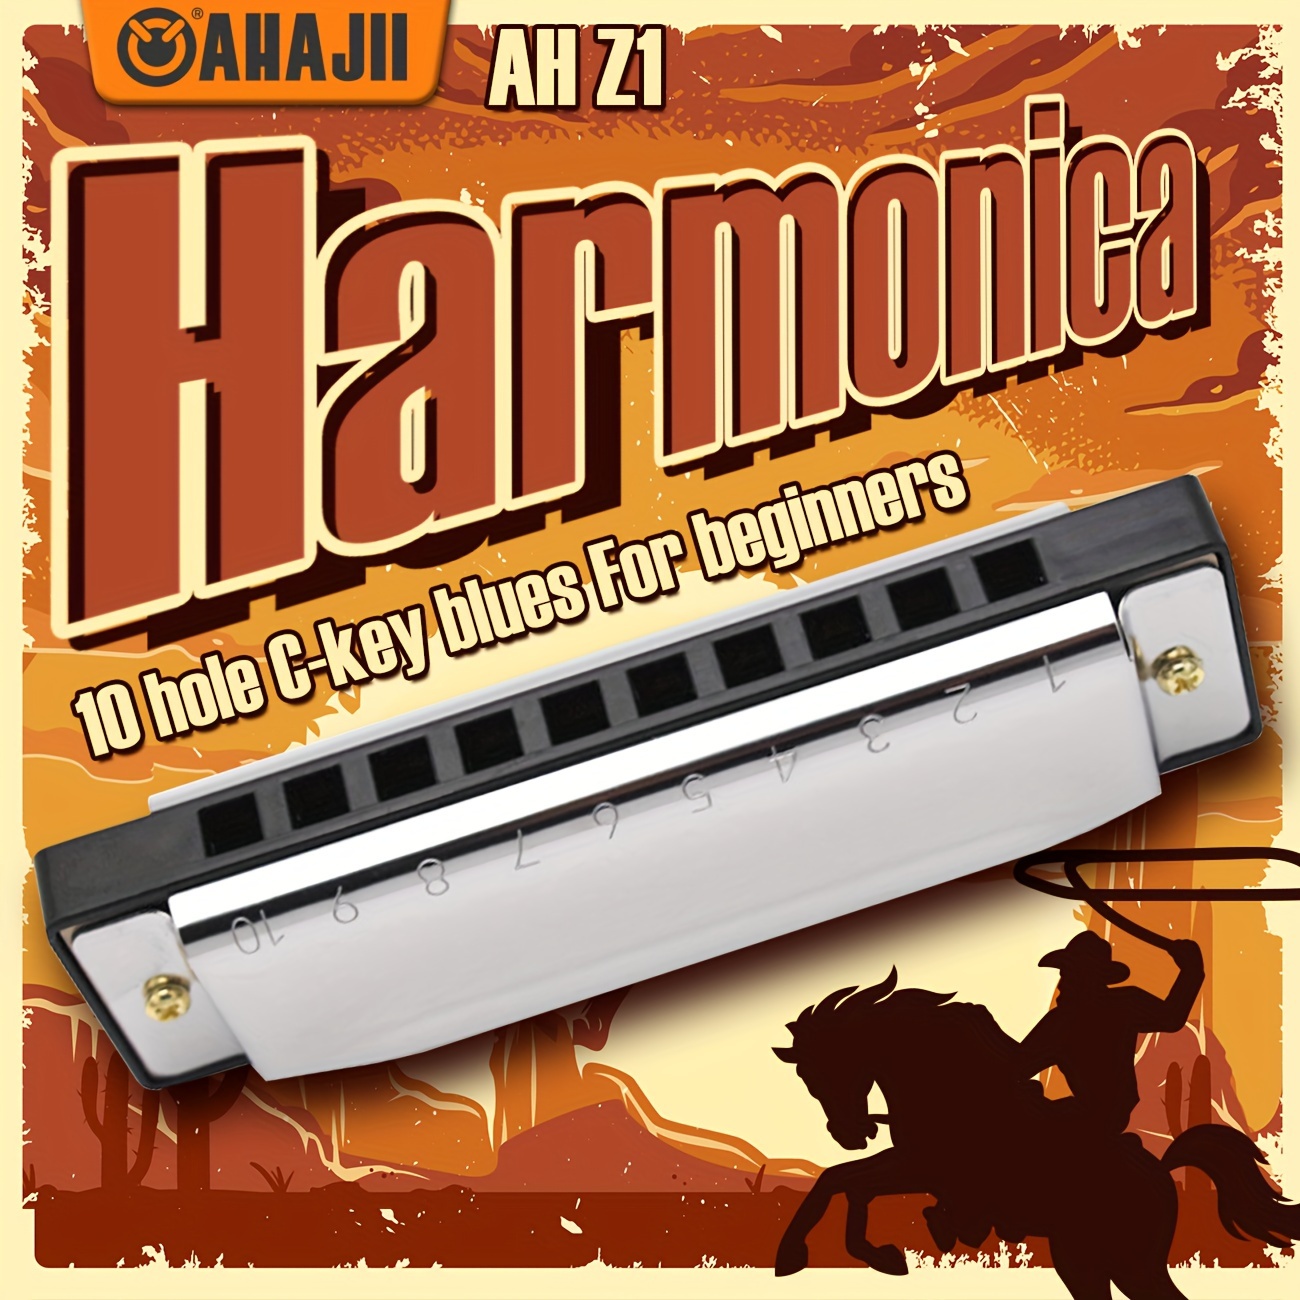 Qimei 24 Holes Chromatic Harmonica Q8 Version, Suitable For Classroom,  Beginners, Adults, Self-Study